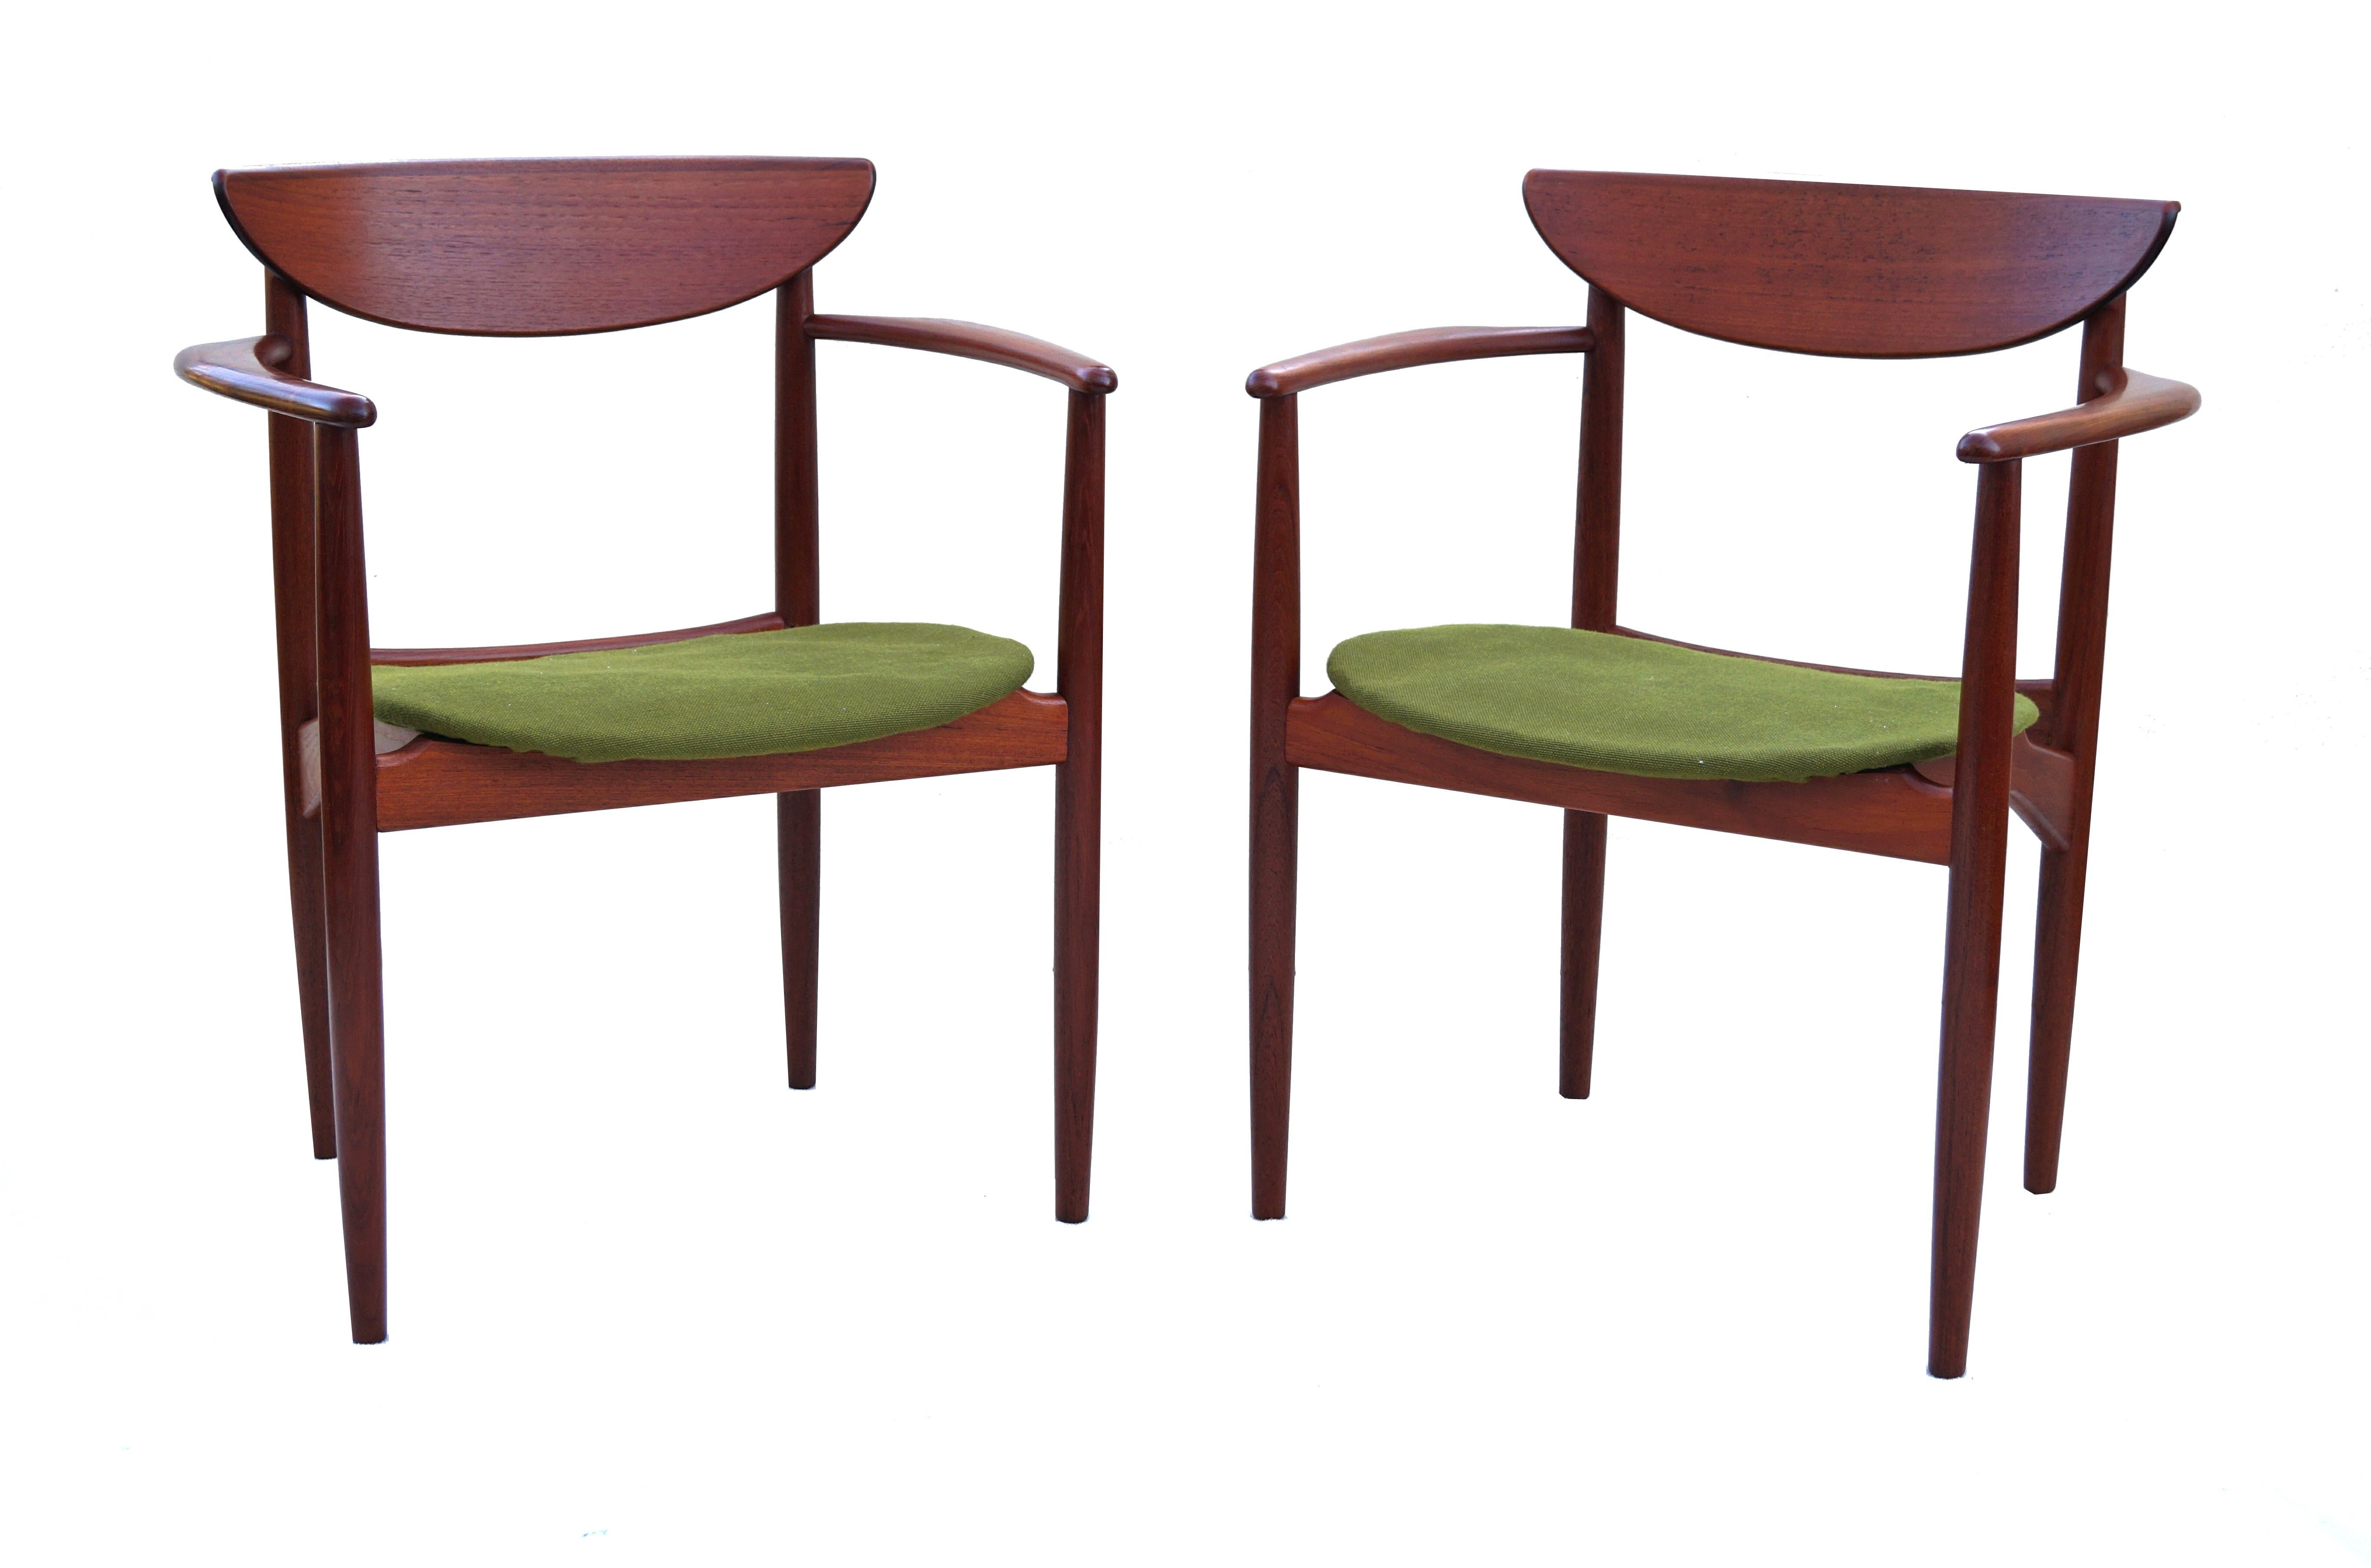 Pair of Teak Scandinavian Modern Sculptural Peter Hvidt Side Arm Lounge Chairs. Seats are matching in color, but taken in different lighting. Some glare to wood on photos. 